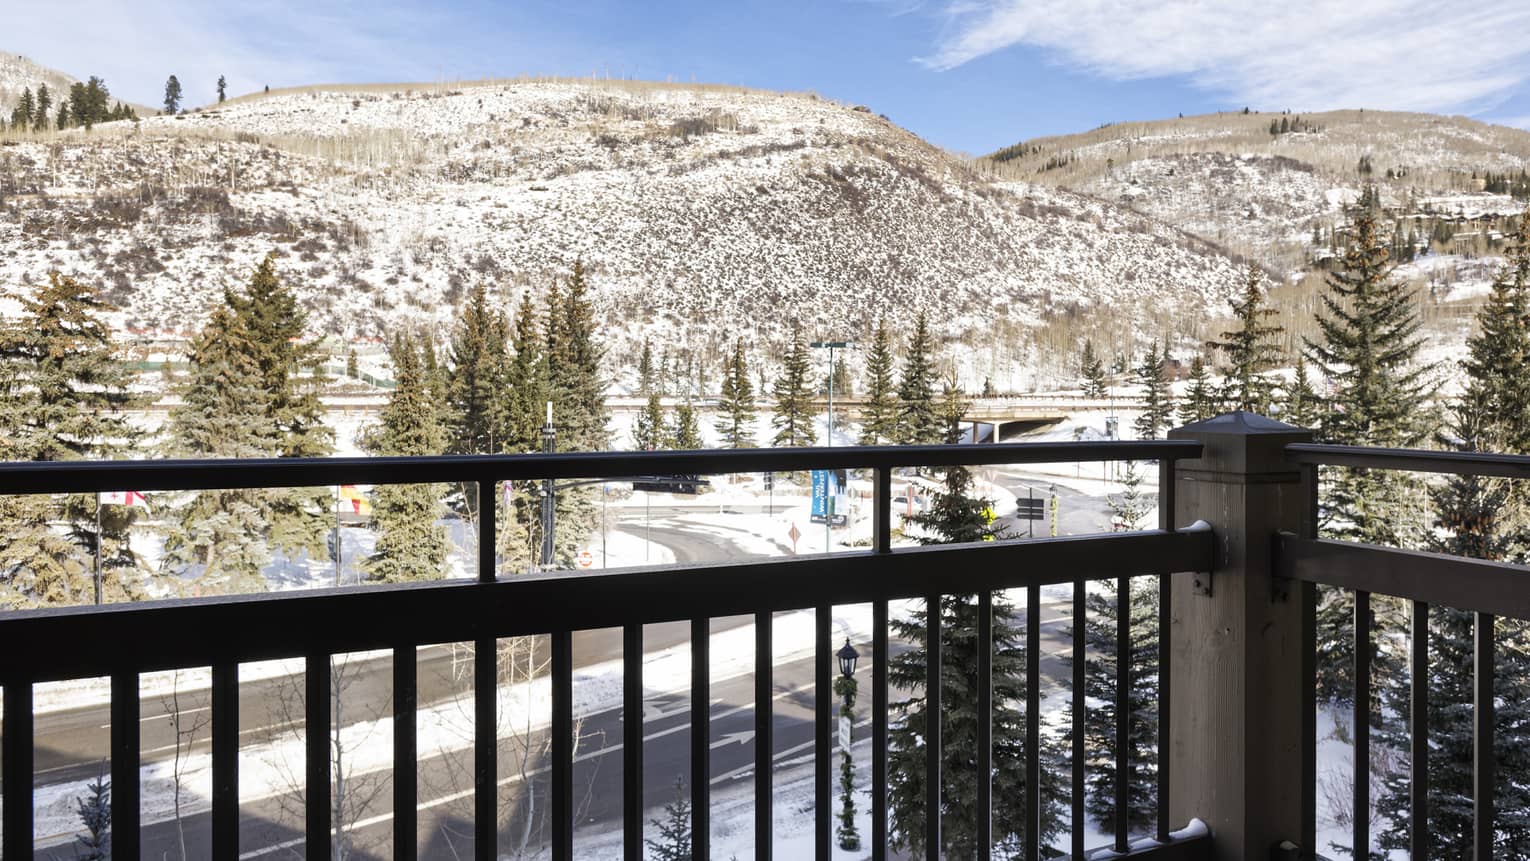 Balcony overlooking mountains lightly covered in snow